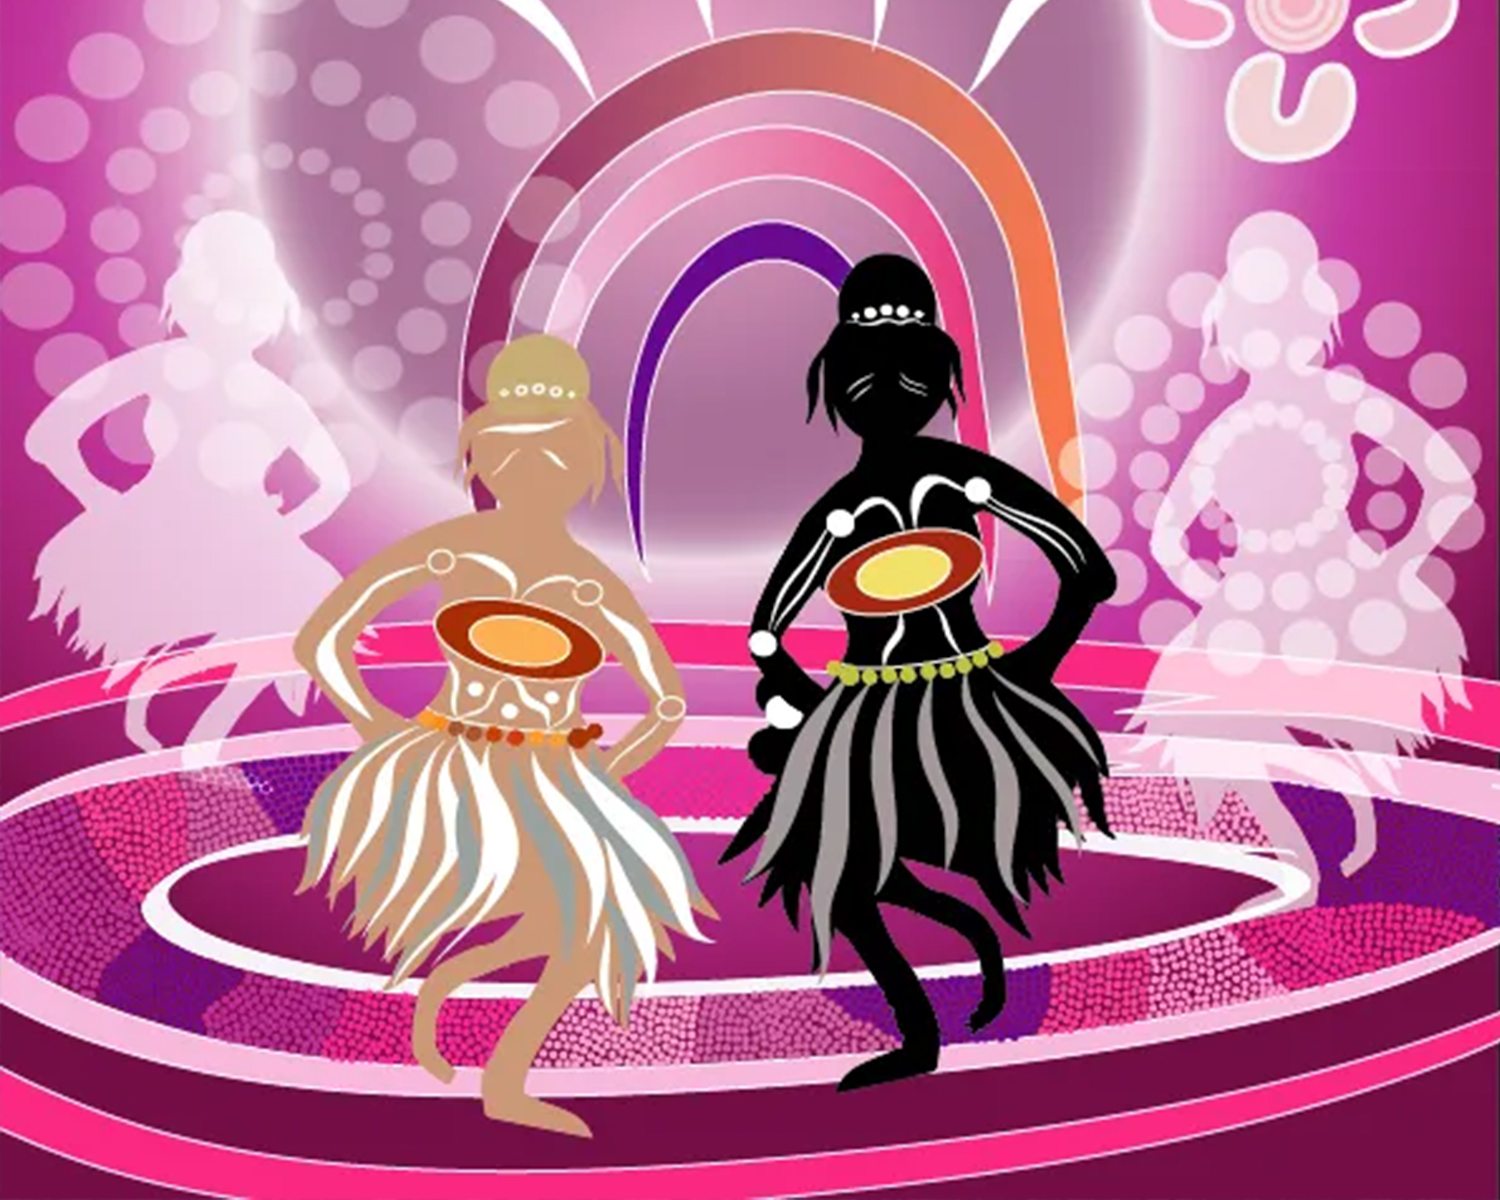 An animation still featuring two First Nations female figures performing dance moves, the ground below them is white concentric circles that radiate out and in the background of the image there are traditional symbols. The work features a colour palette of vibrant pinks, purples and blues.